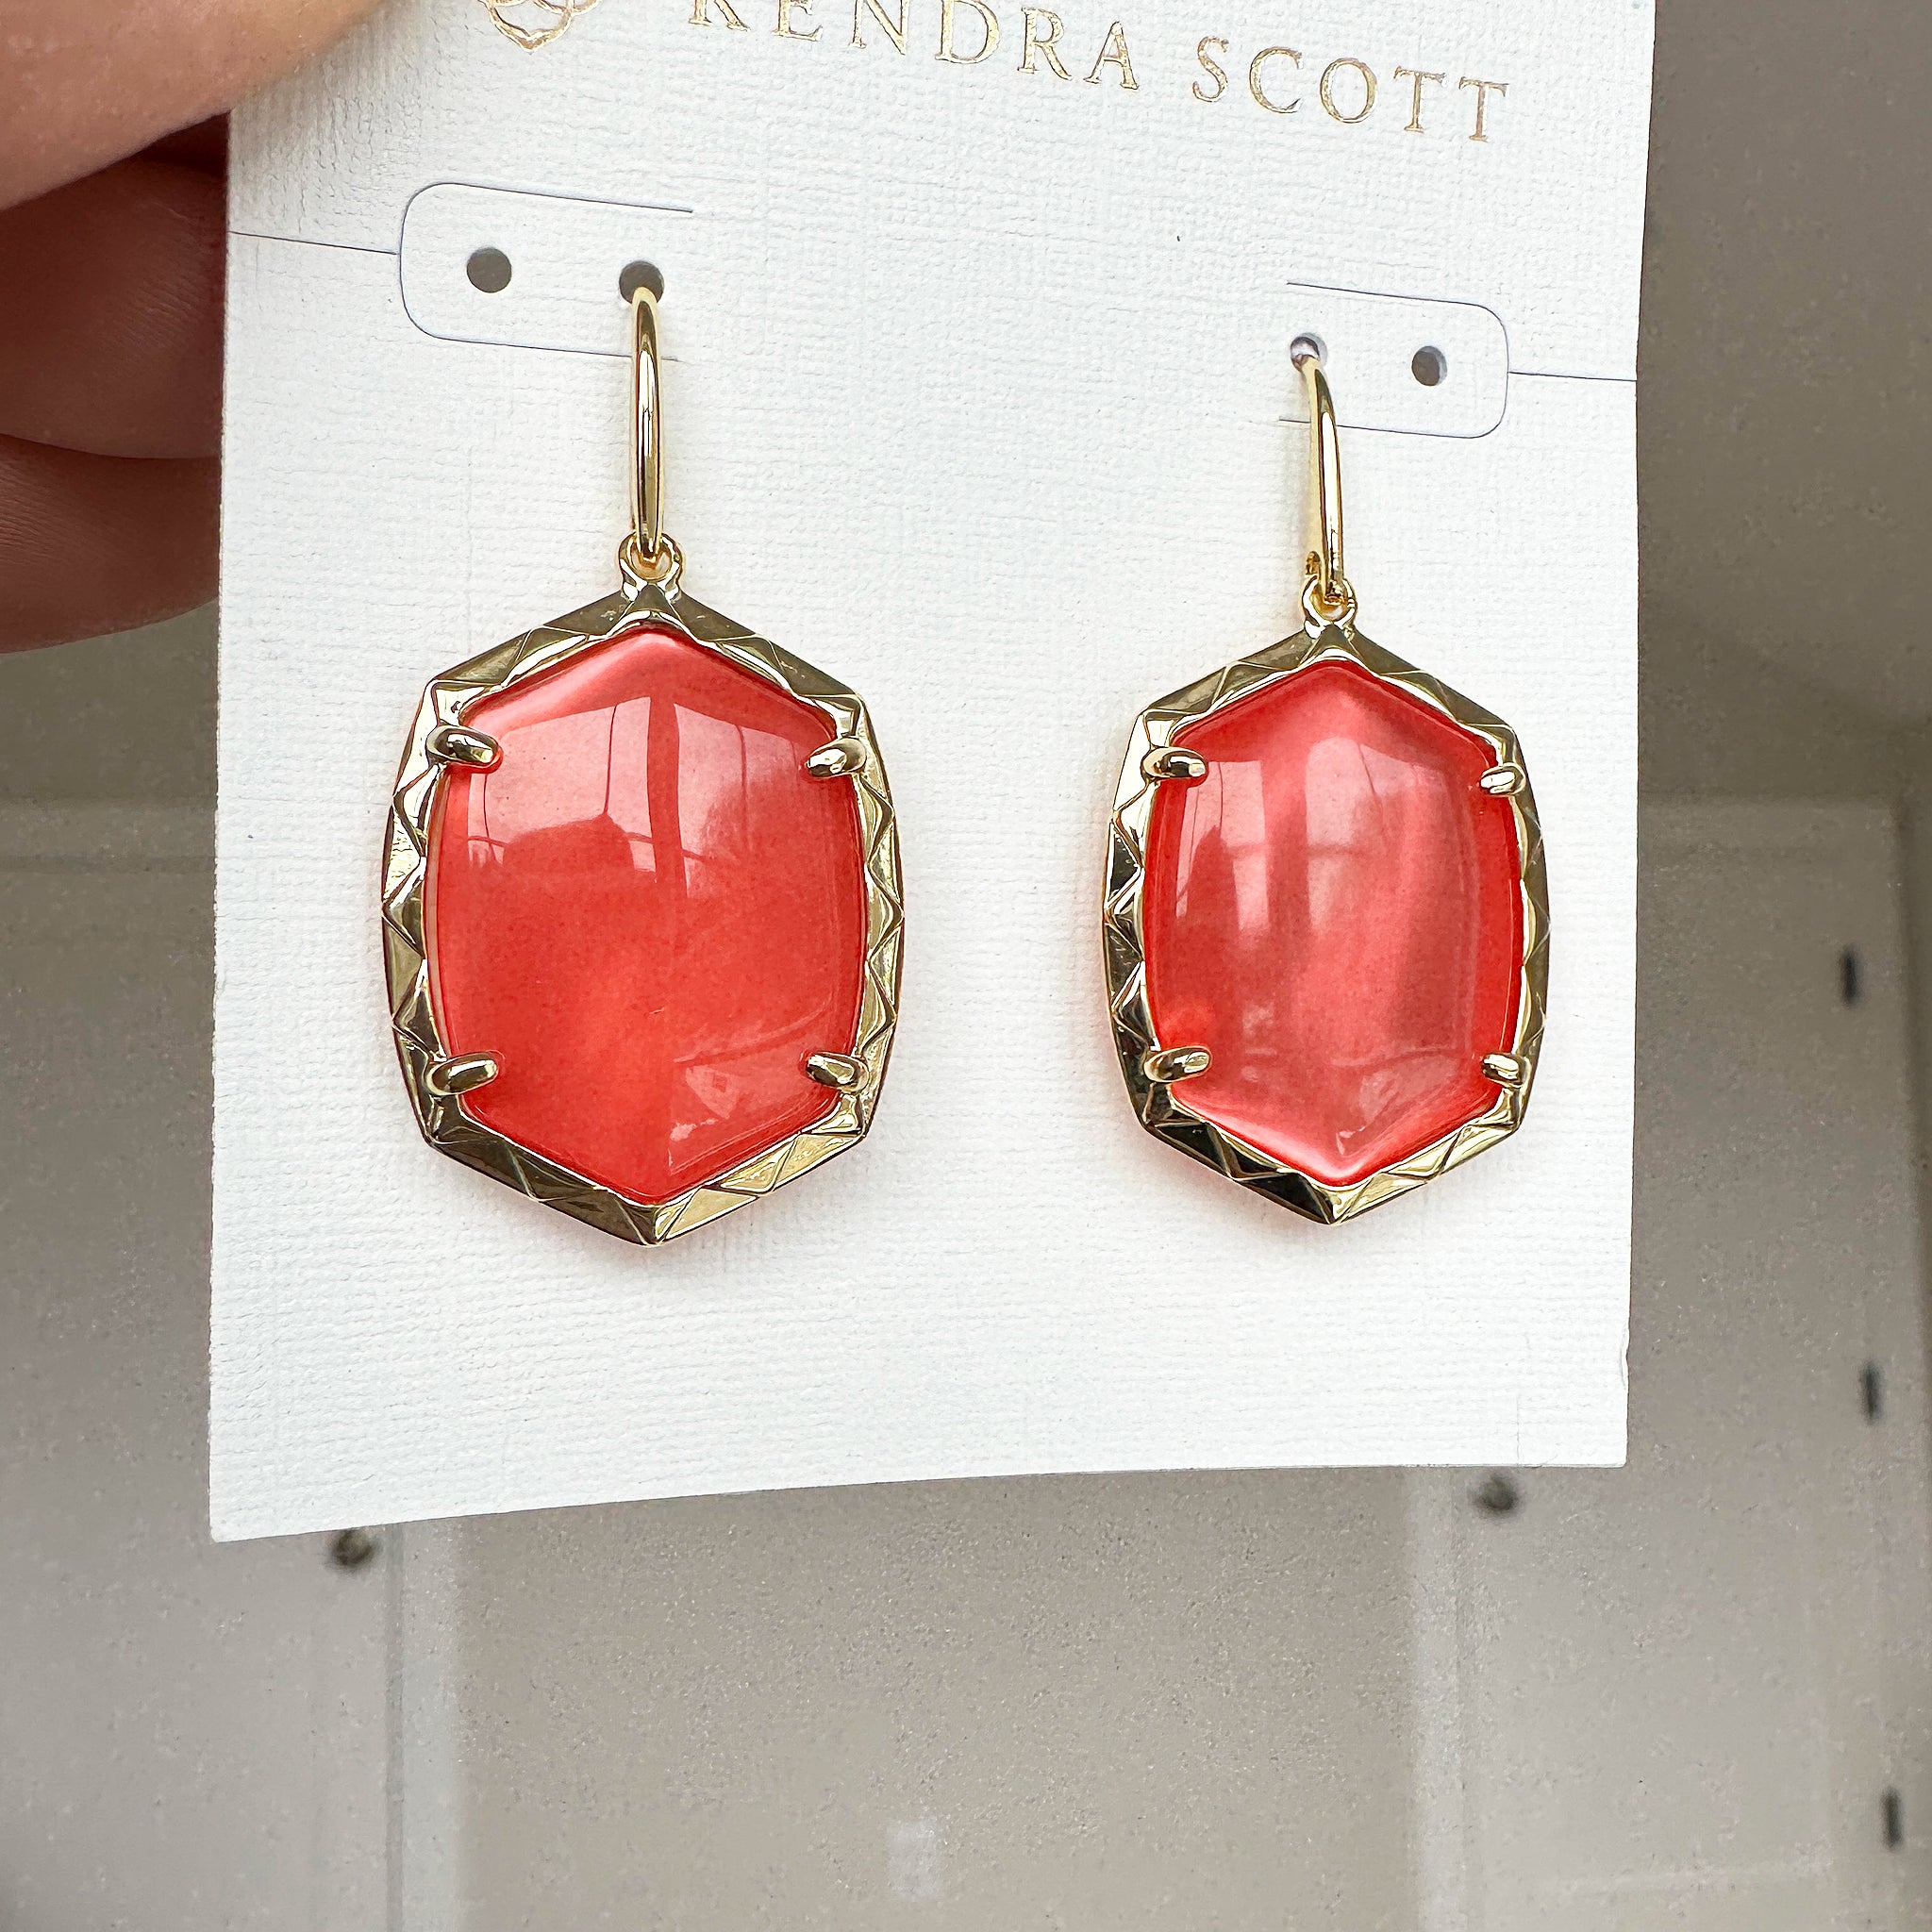 Kendra Scott Daphne Drop Earrings in Coral Pink Mother of Pearl and Gold